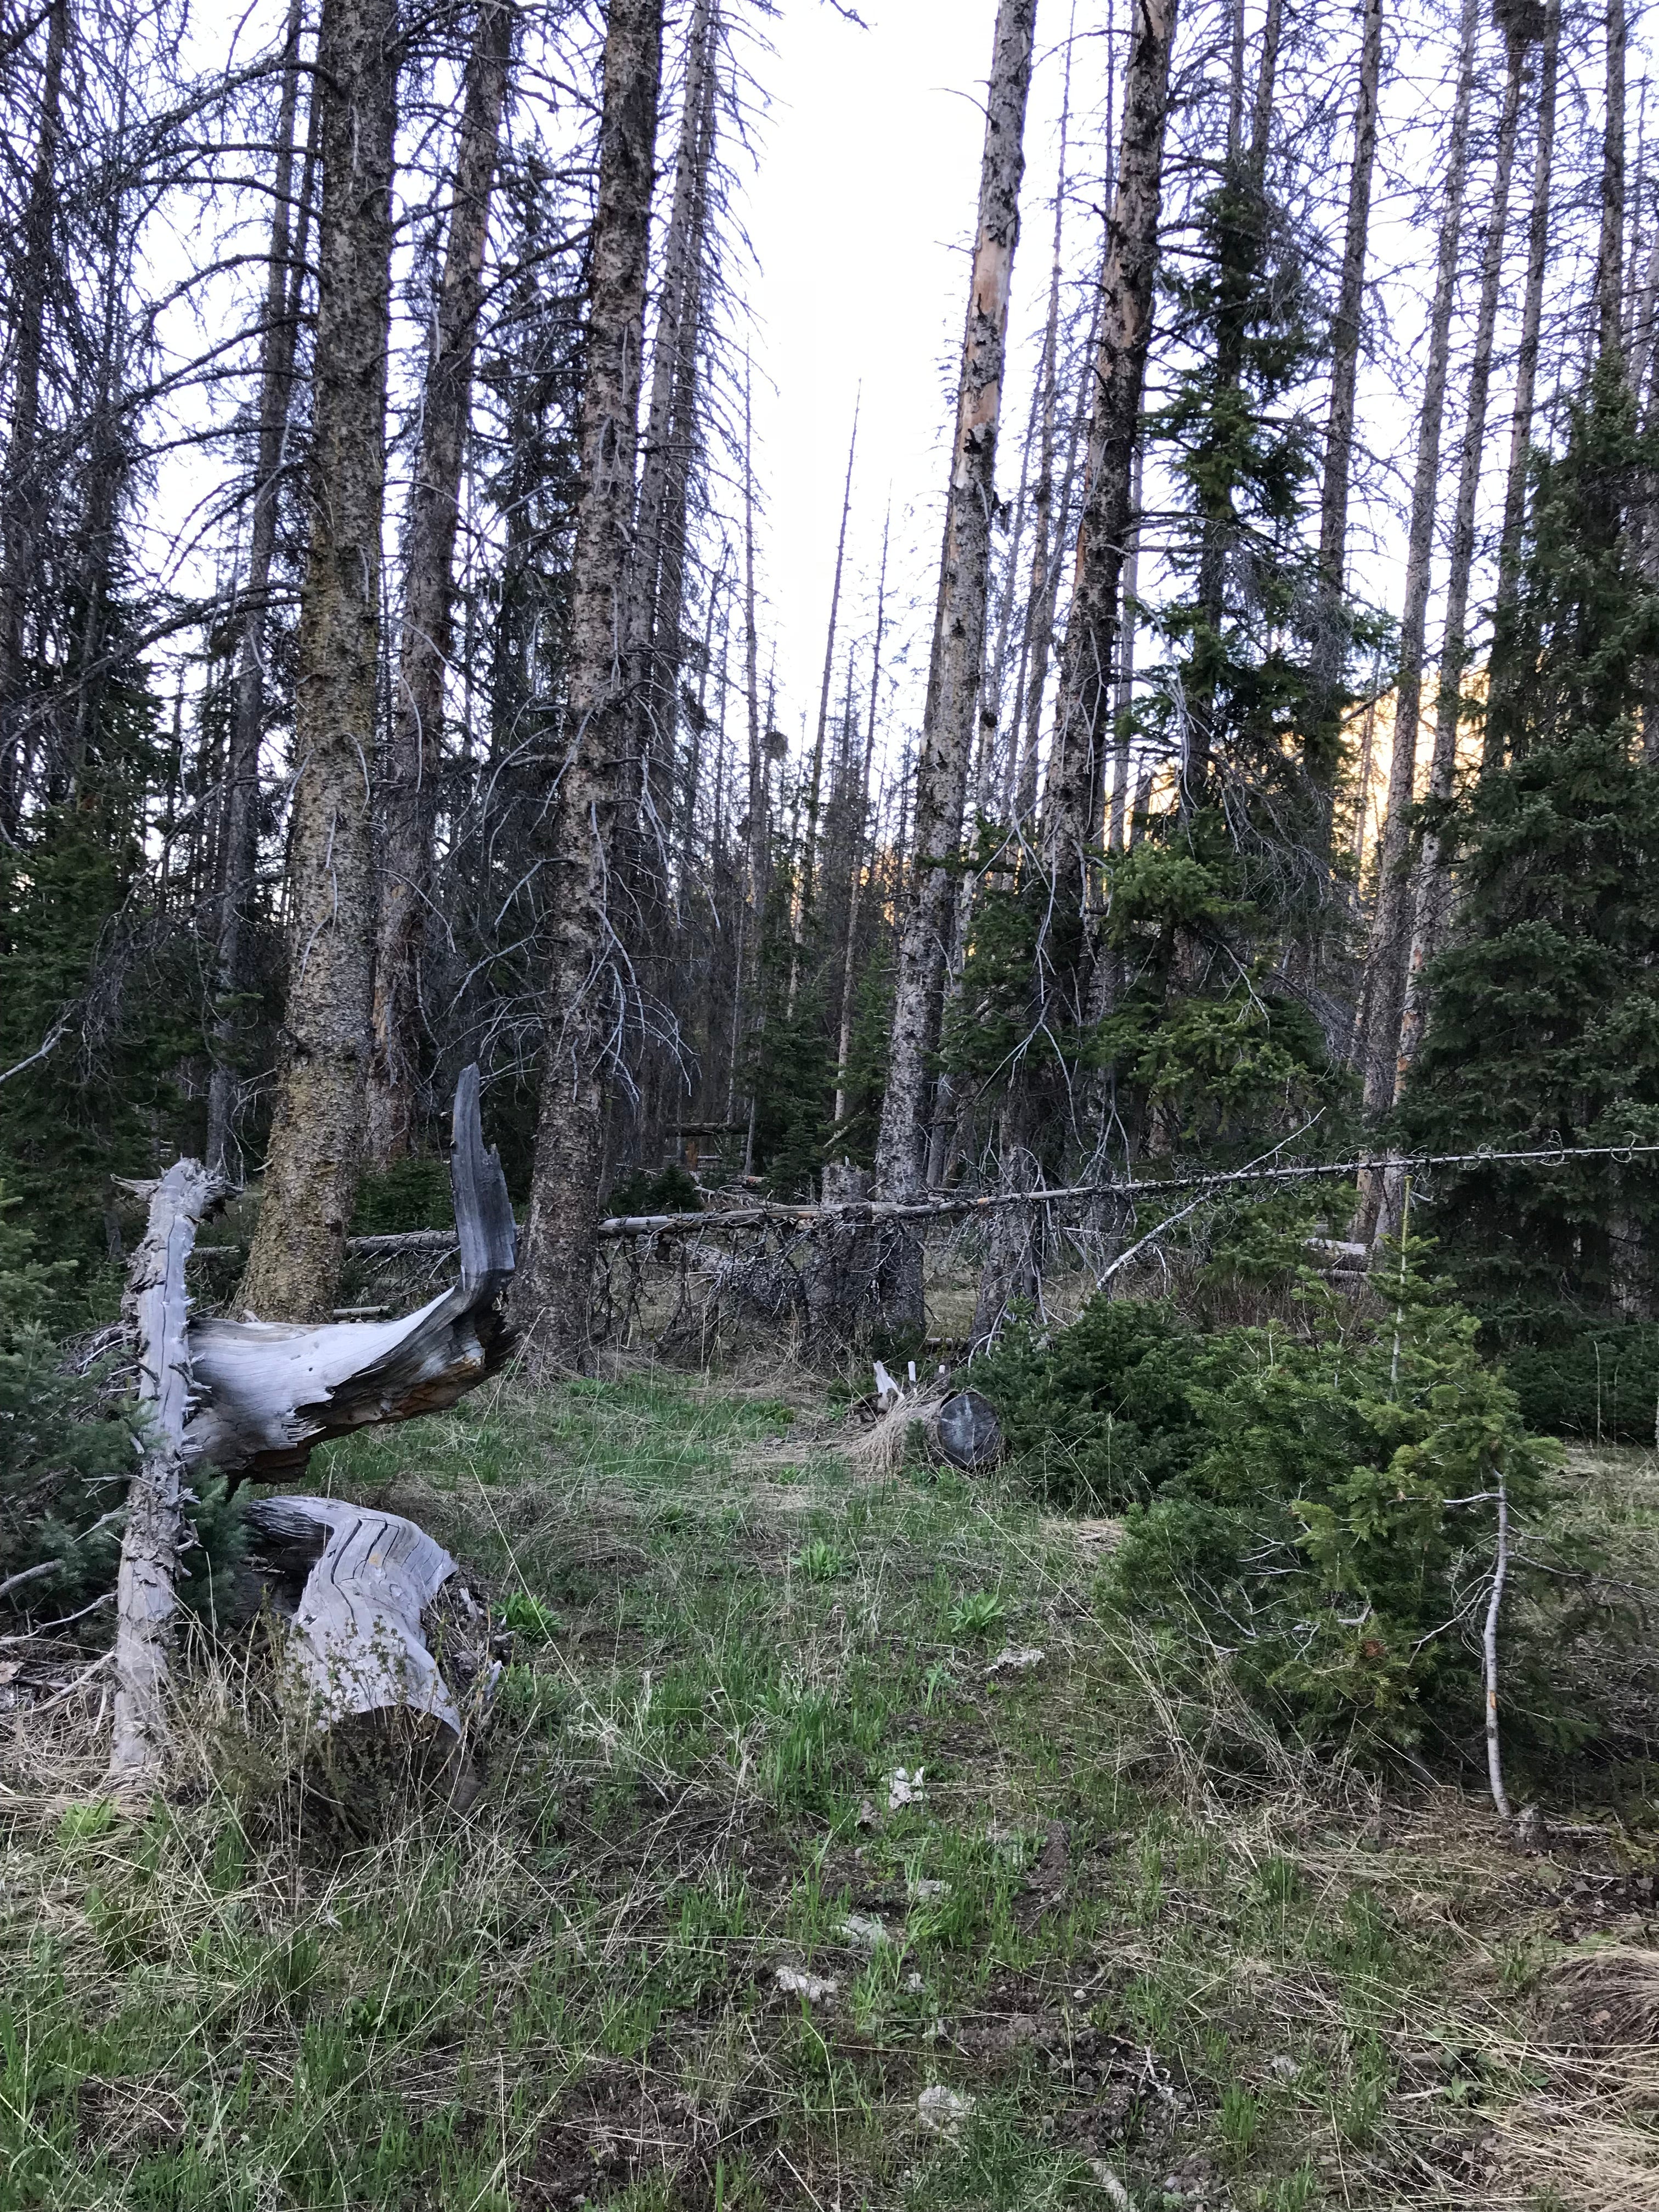 The pine forest we were in.  Lots of deadfall so watch your step.  We also saw lots of animal droppings (elk/moose/deer) so be sure to lock away any food and give any large animals you see lots of space.